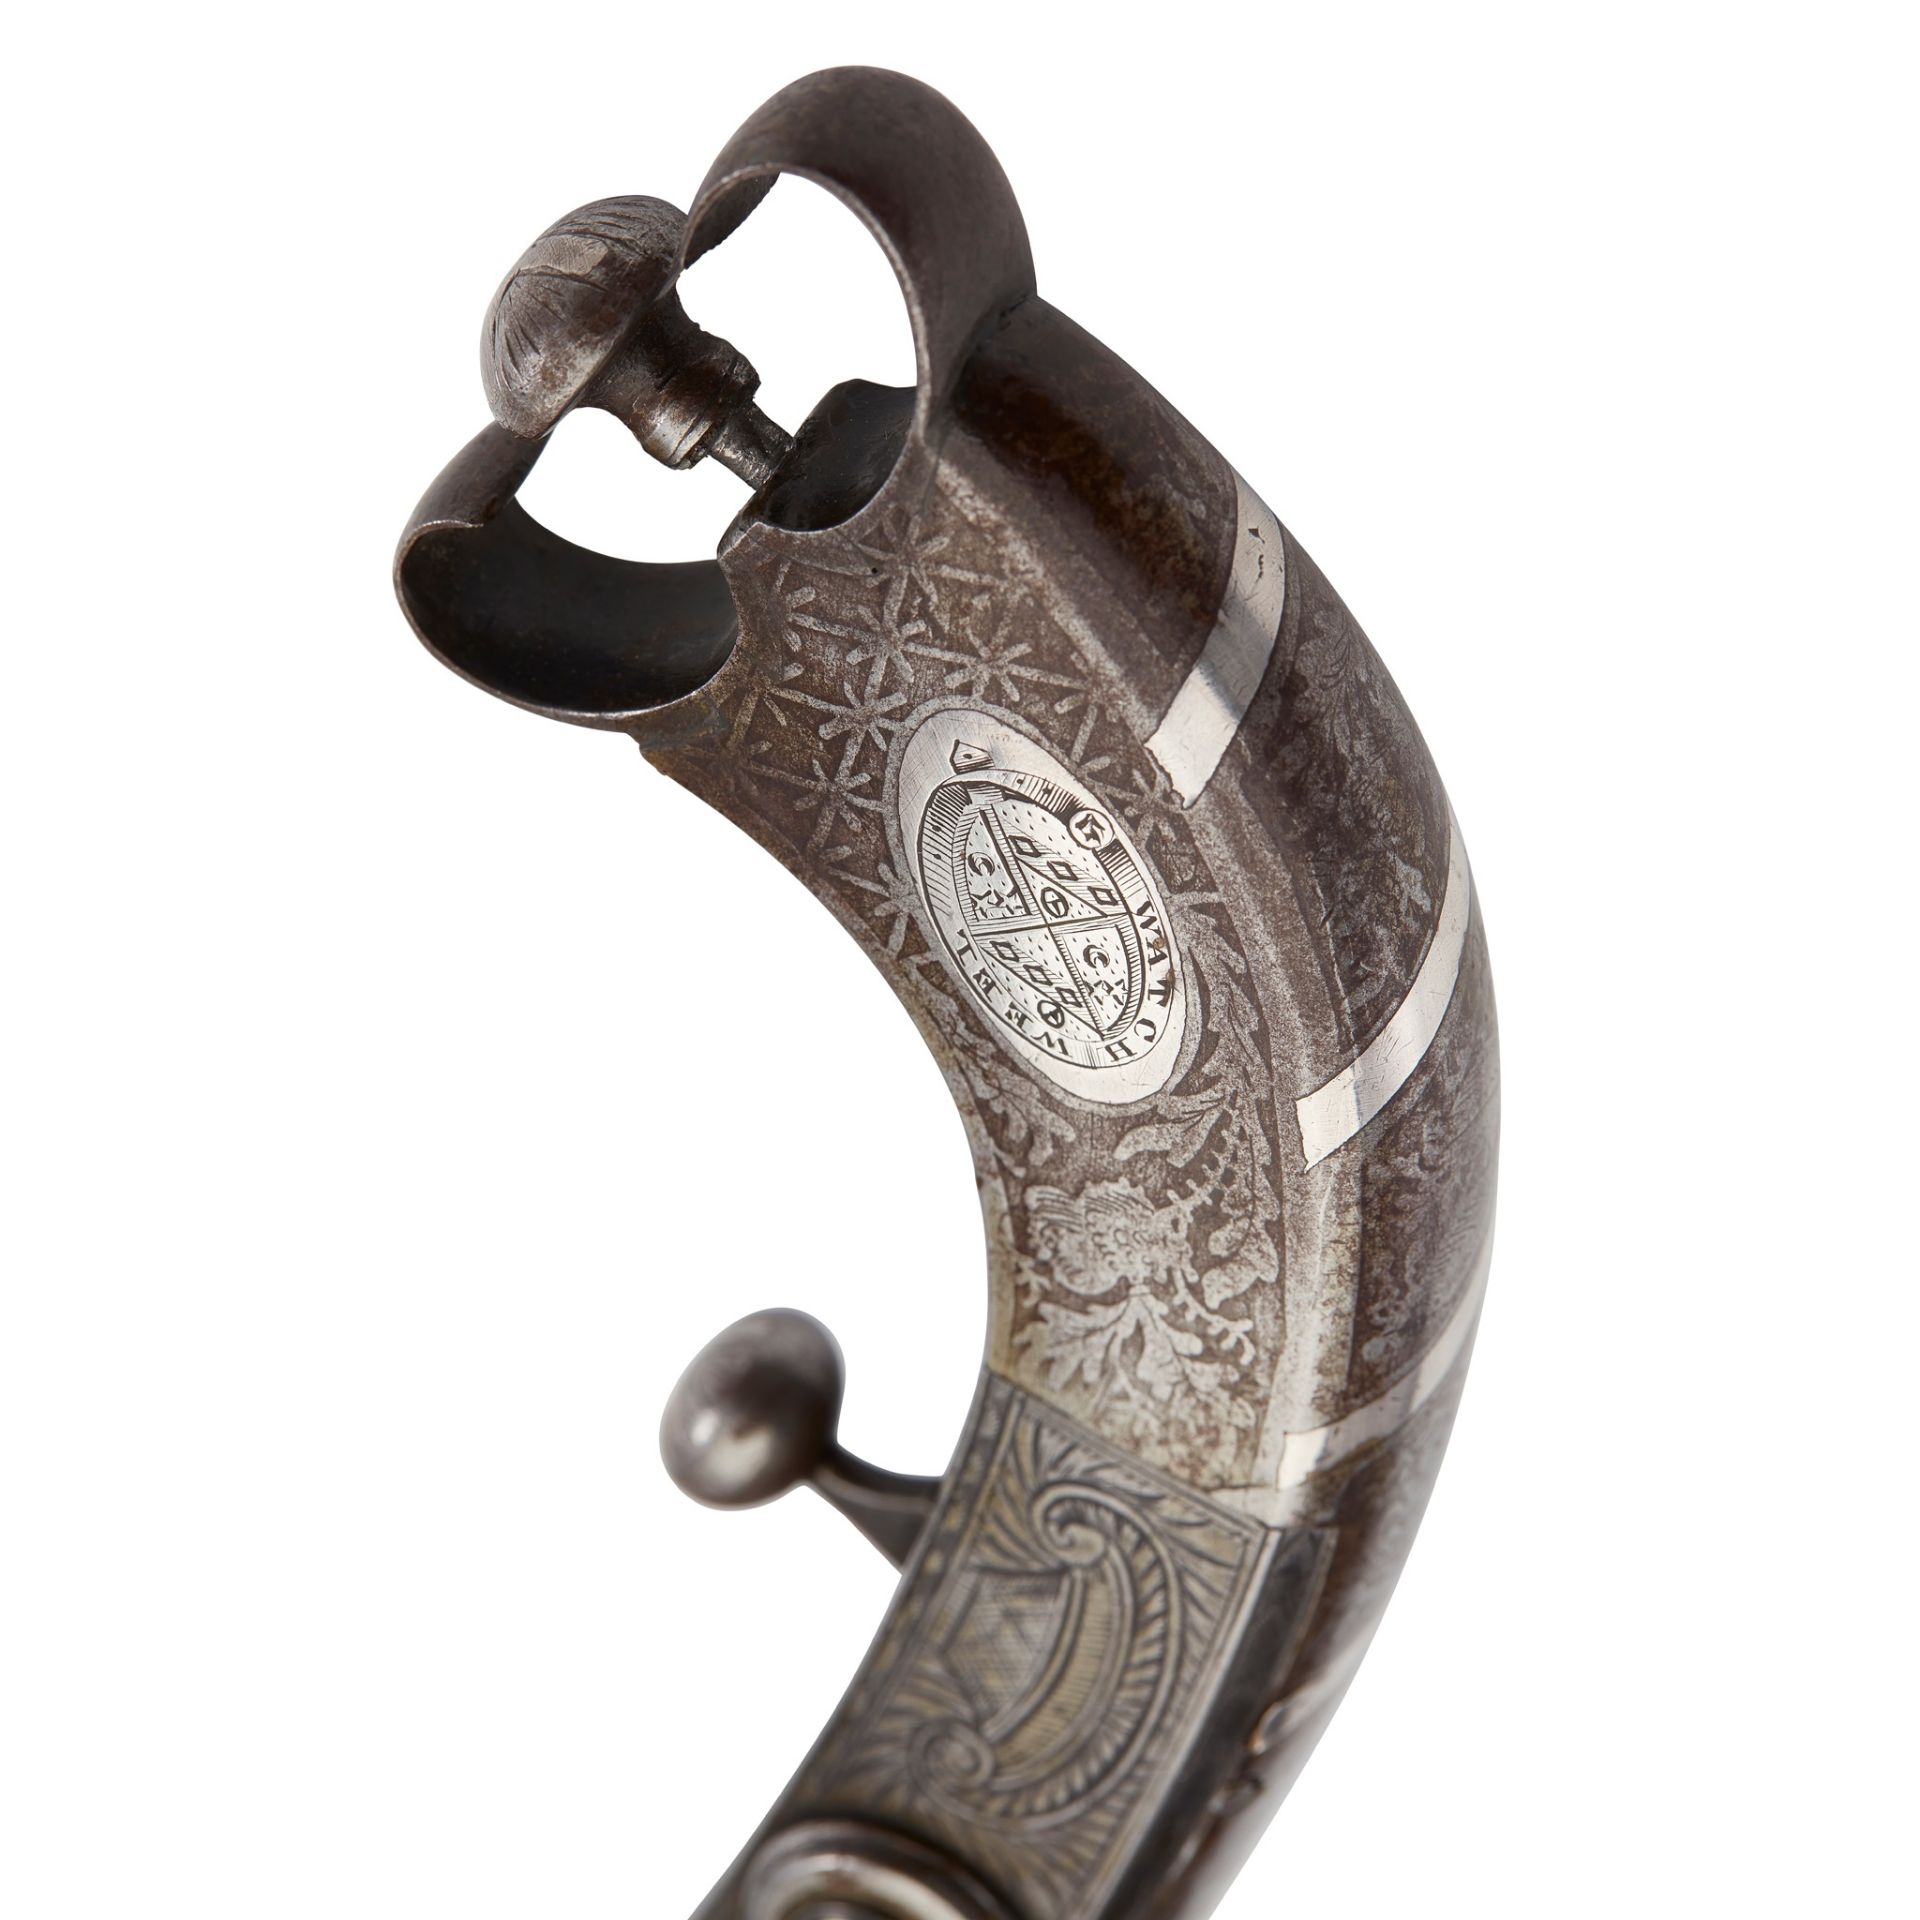 THE SCOTT OF ABBOTSFORD PISTOL AN IMPORTANT FINE EARLY 19TH CENTURY SILVER MOUNTED STEEL SCOTTISH - Image 3 of 6